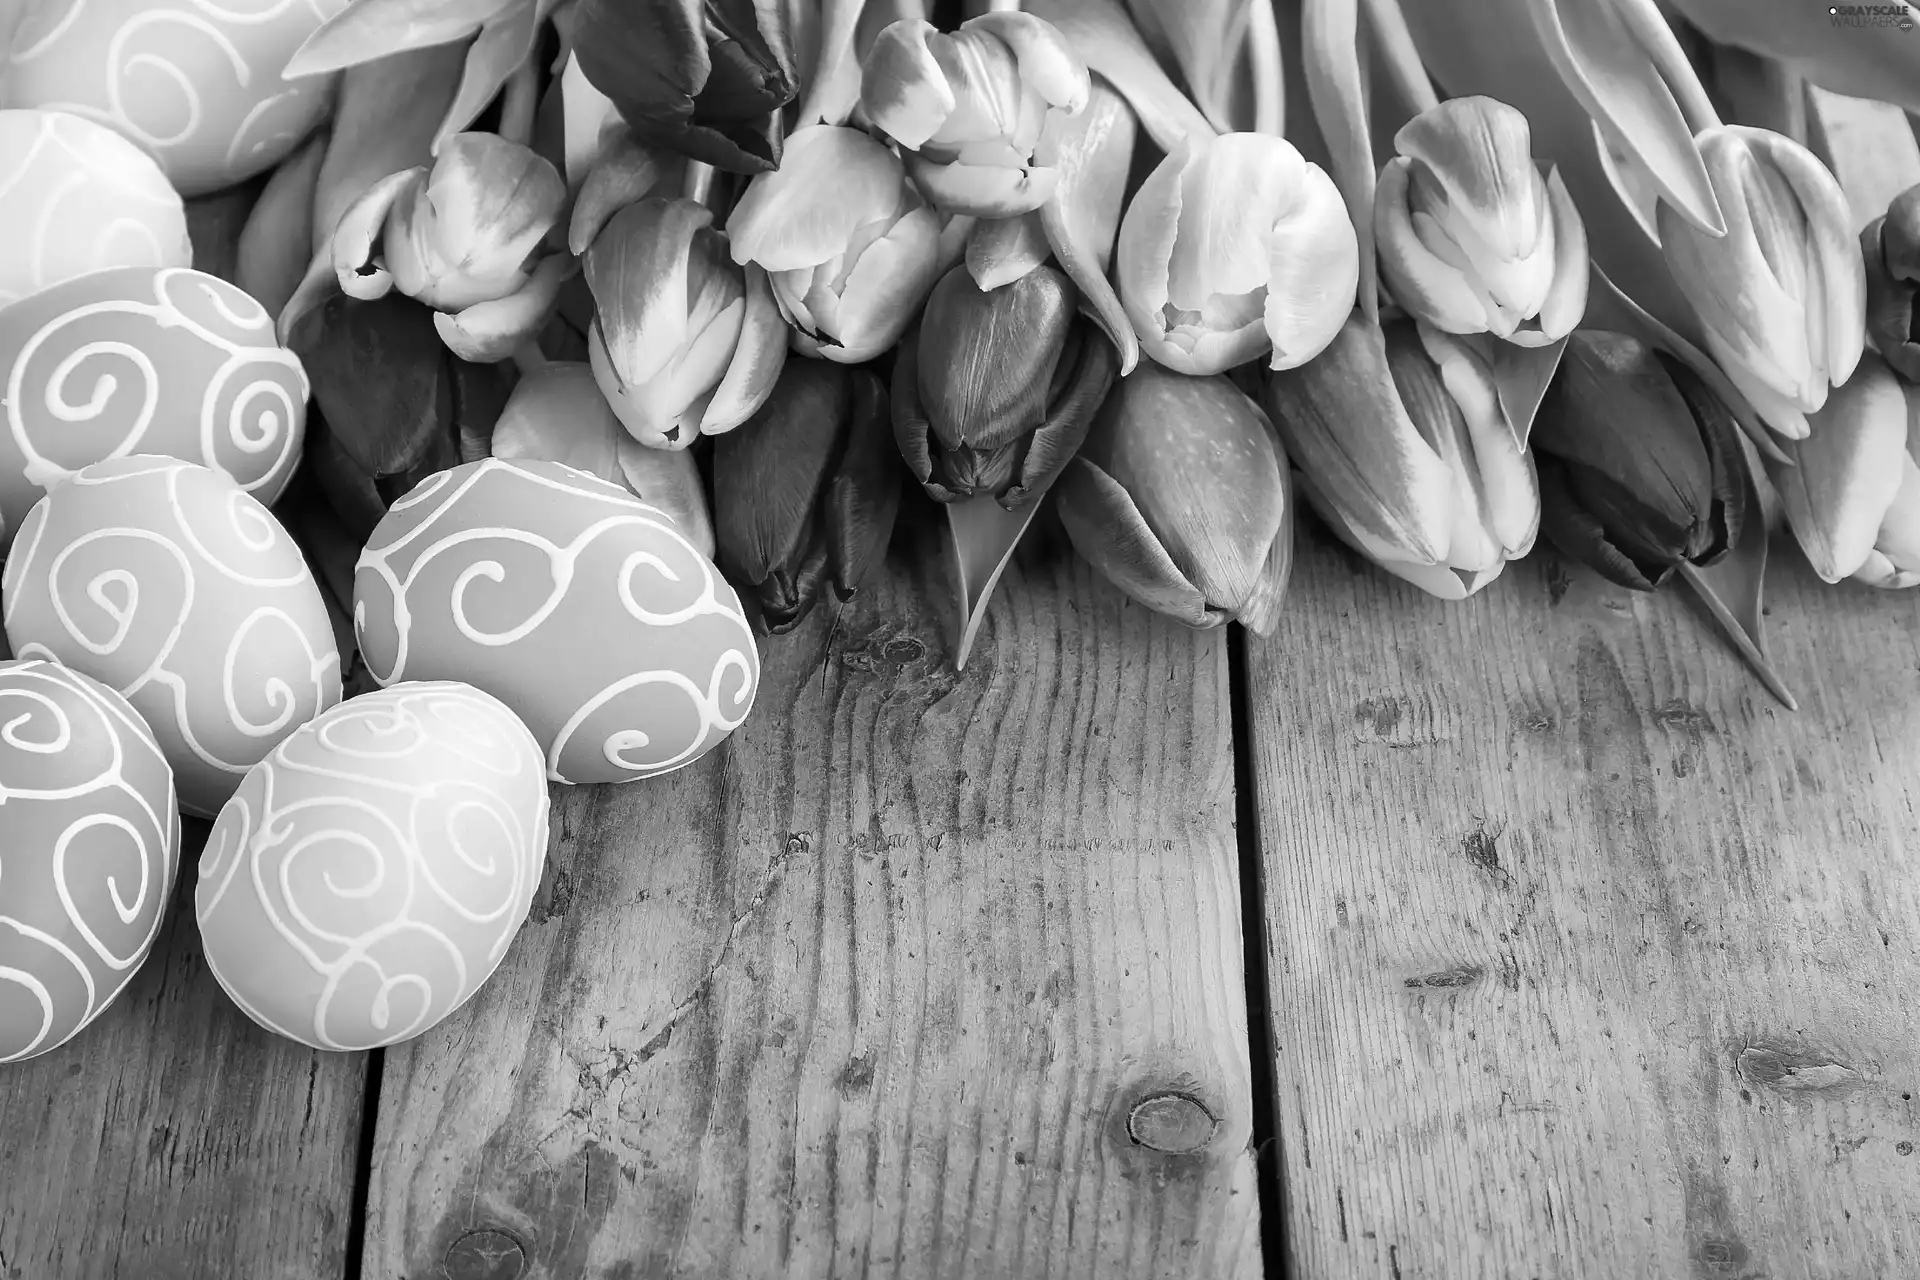 composition, eggs, Tulips, Easter